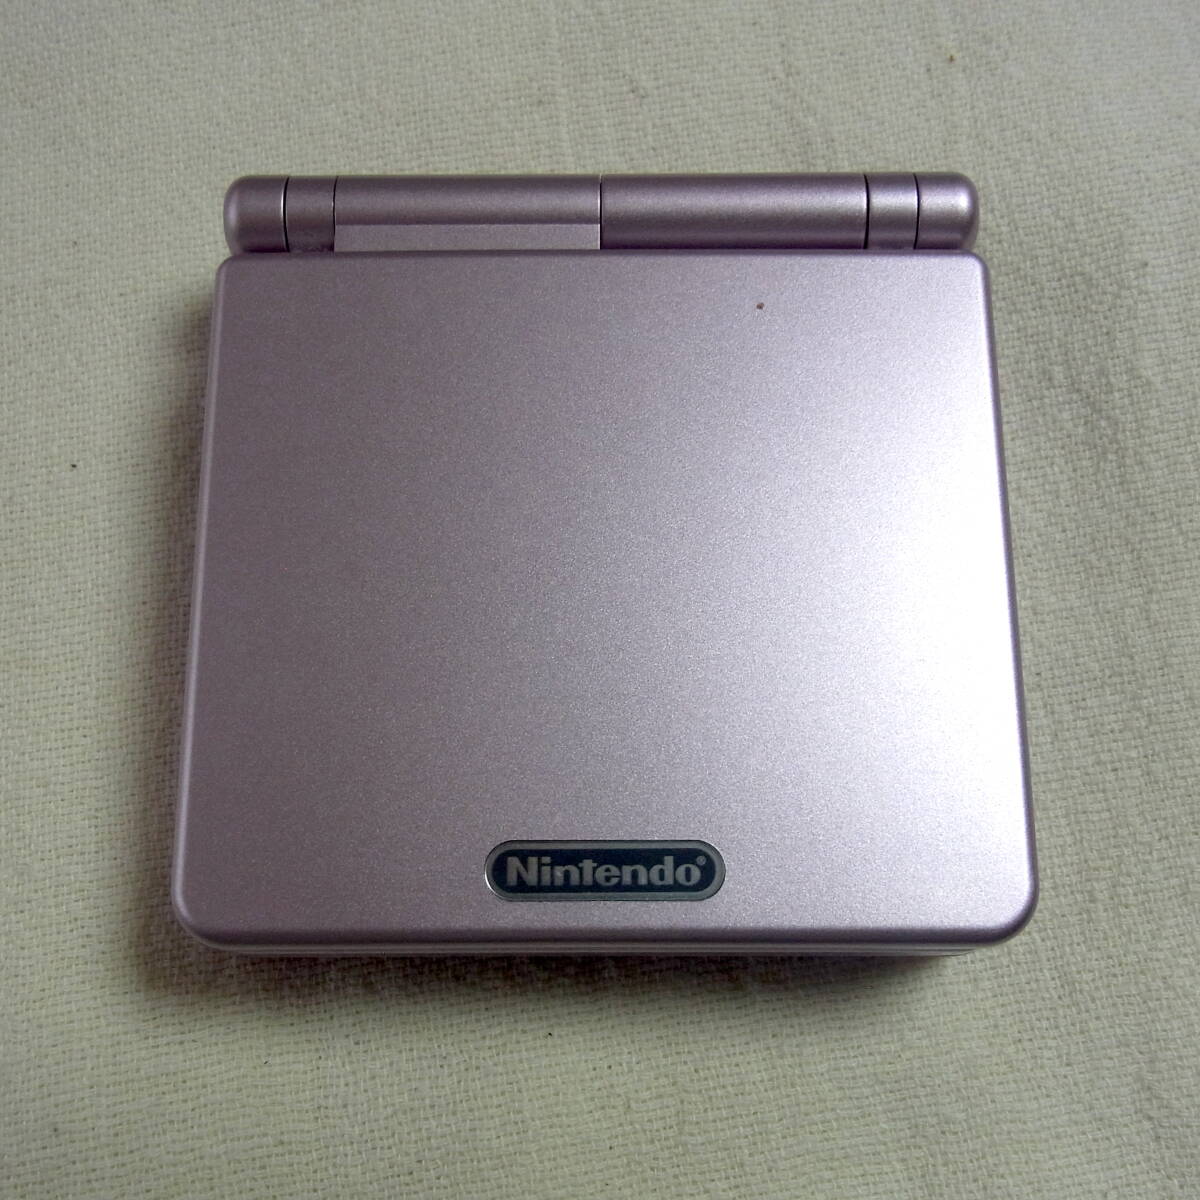  Game Boy Advance SP[ body ] nintendo | pearl pink | operation verification ending |AGS-001|GBASP| special |Nintendo GAME BOY ADVANCE